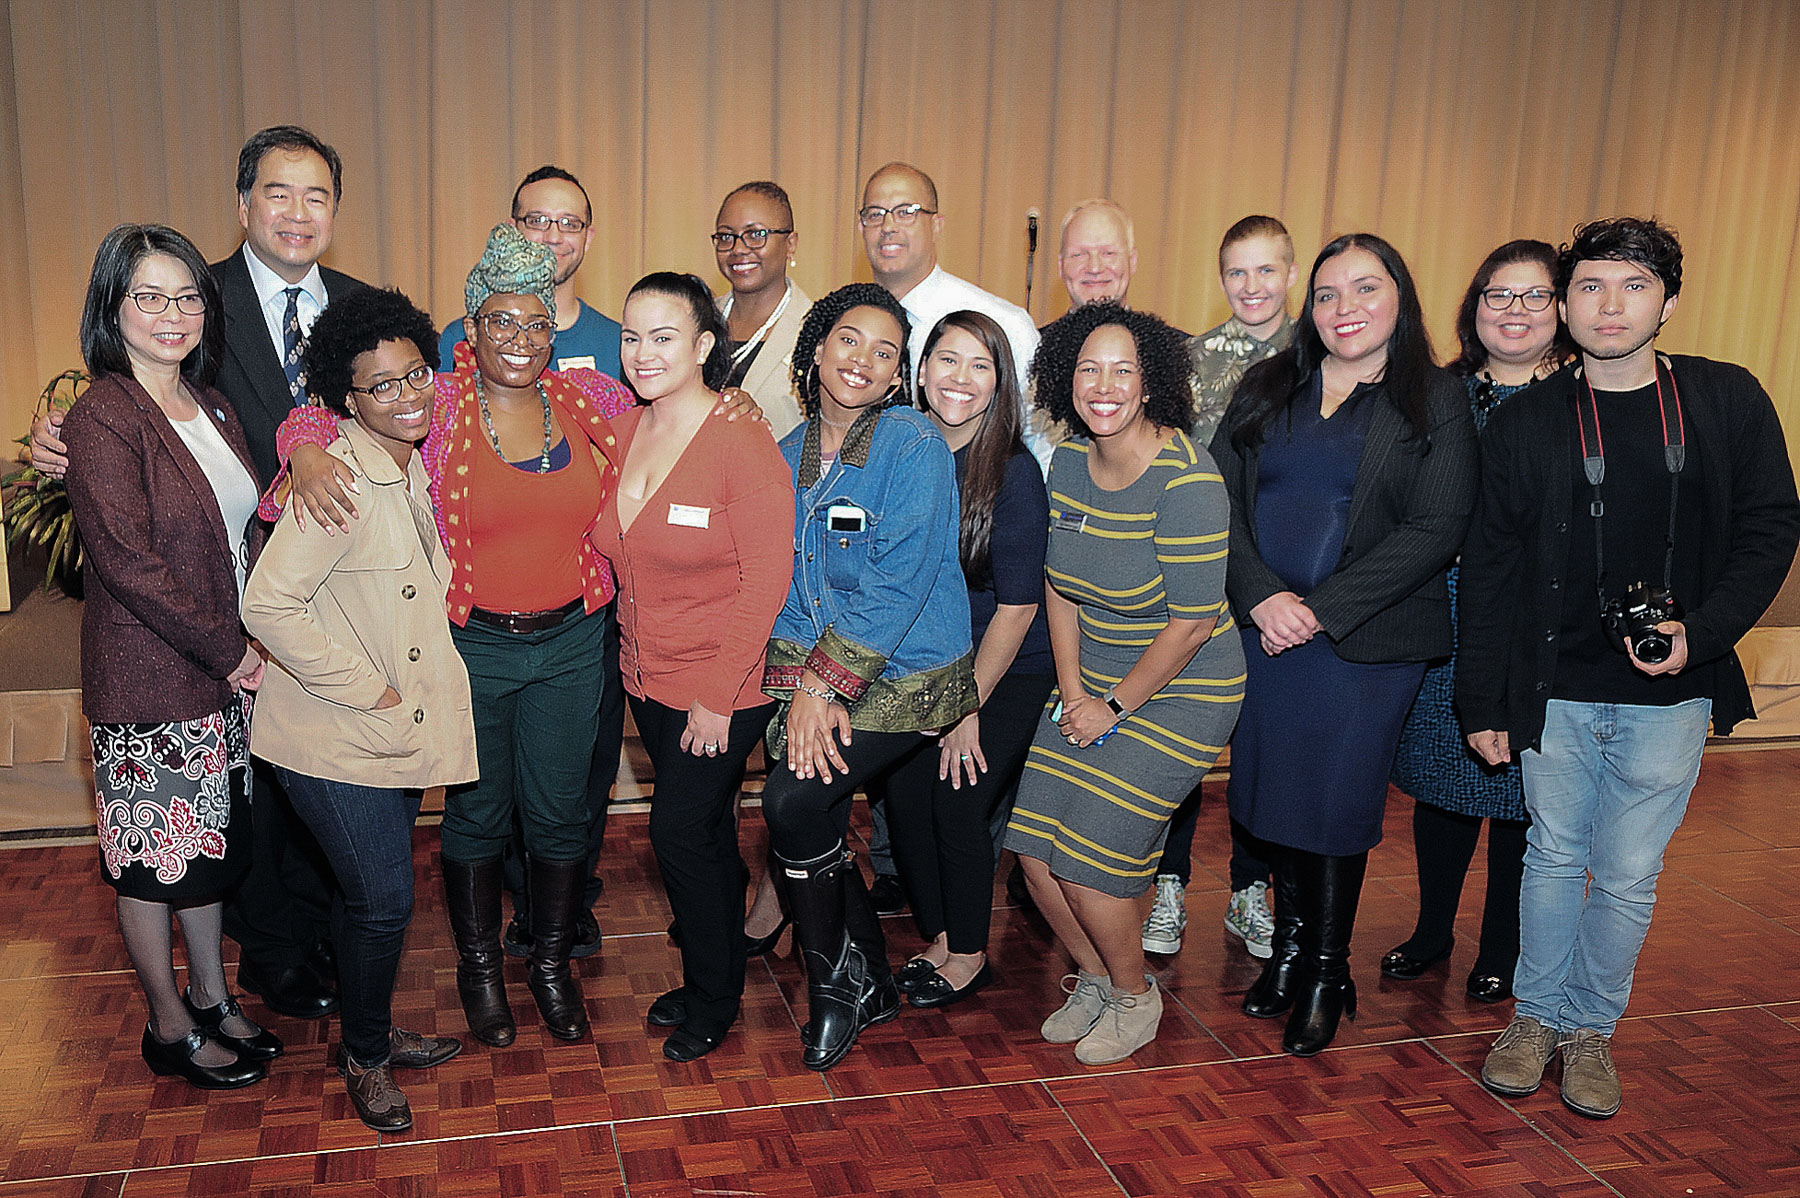 Josephine Esteban and DePaul University President A. Gabriel Esteban, Ph.D., far left, at the annual President's Diversity Brunch, an event for students and families who participate in the Office of Multicultural Student Success programs. (DePaul University/John Booz)